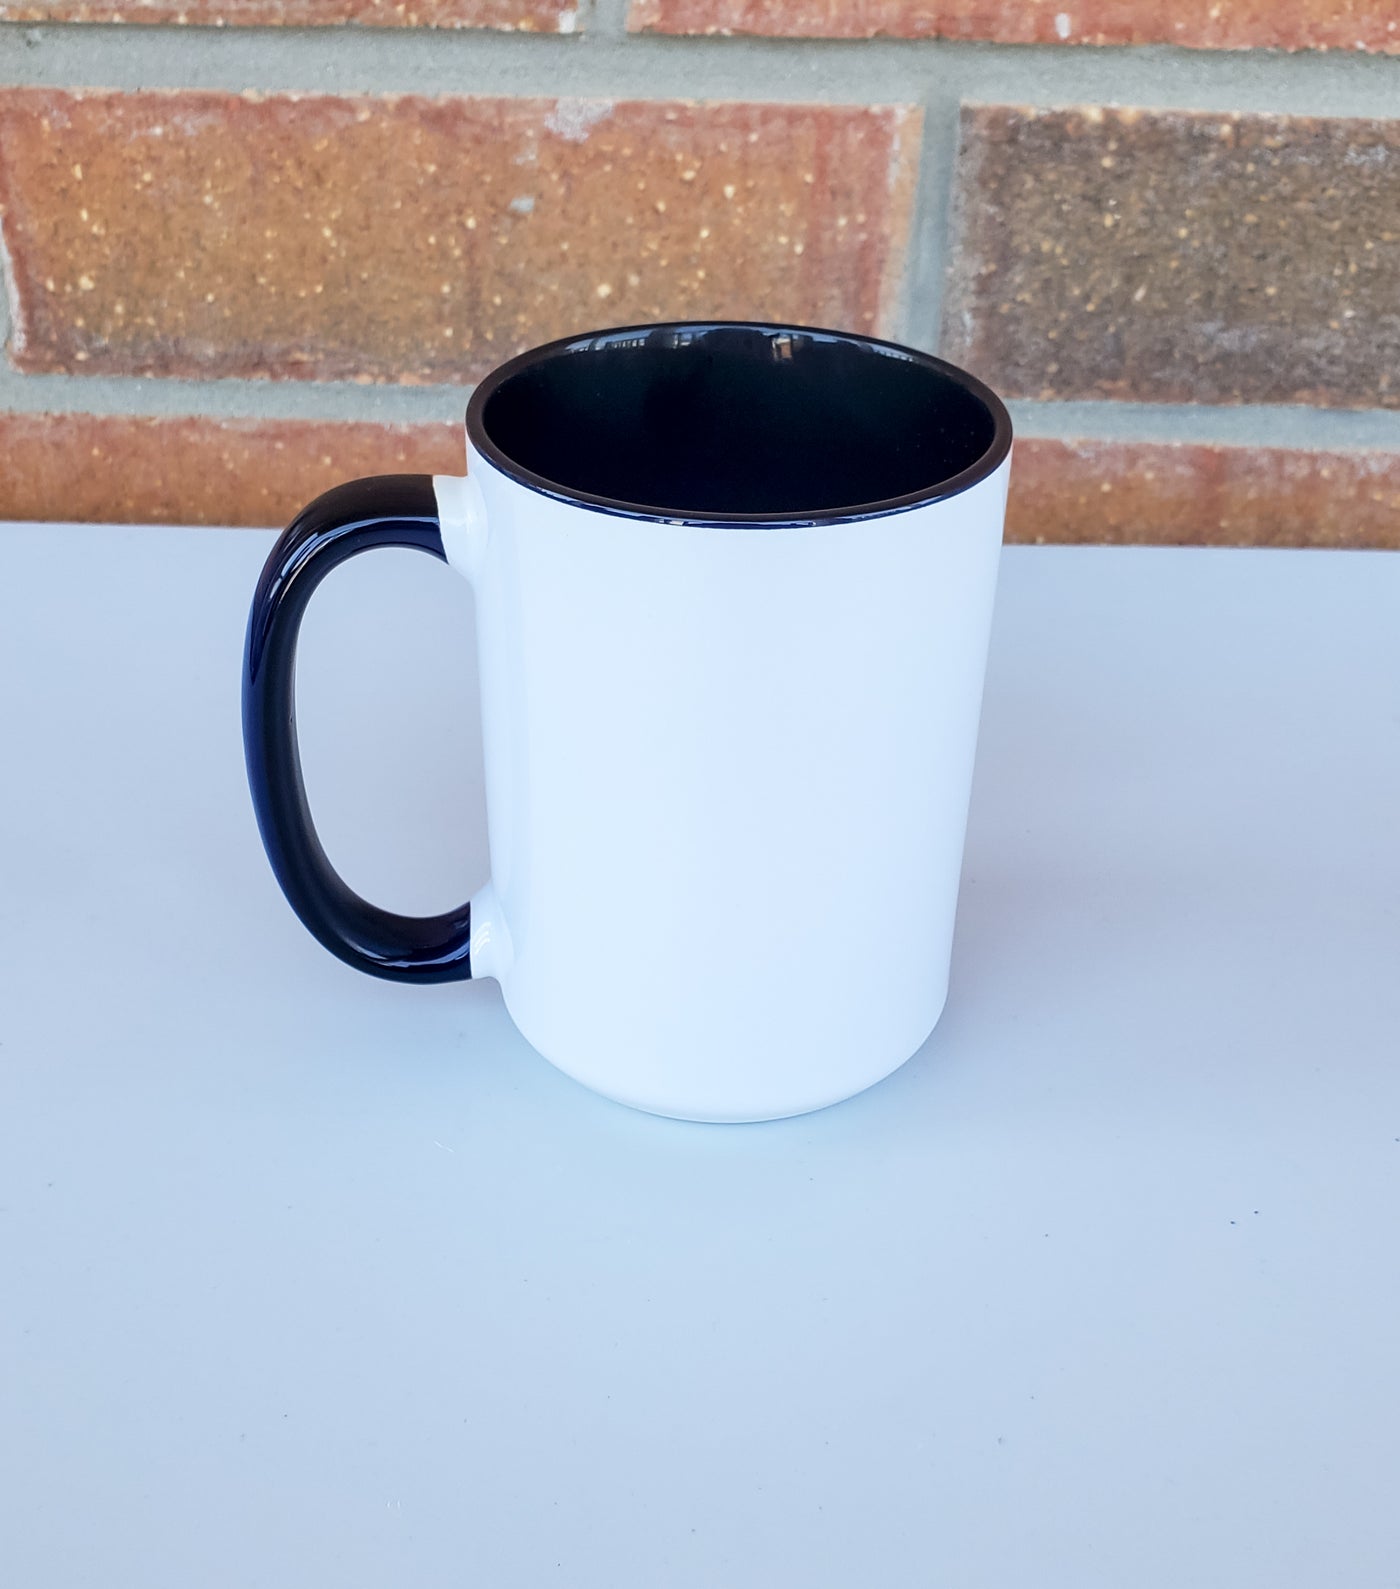 Not Connect With People David Schitts Creek Mug